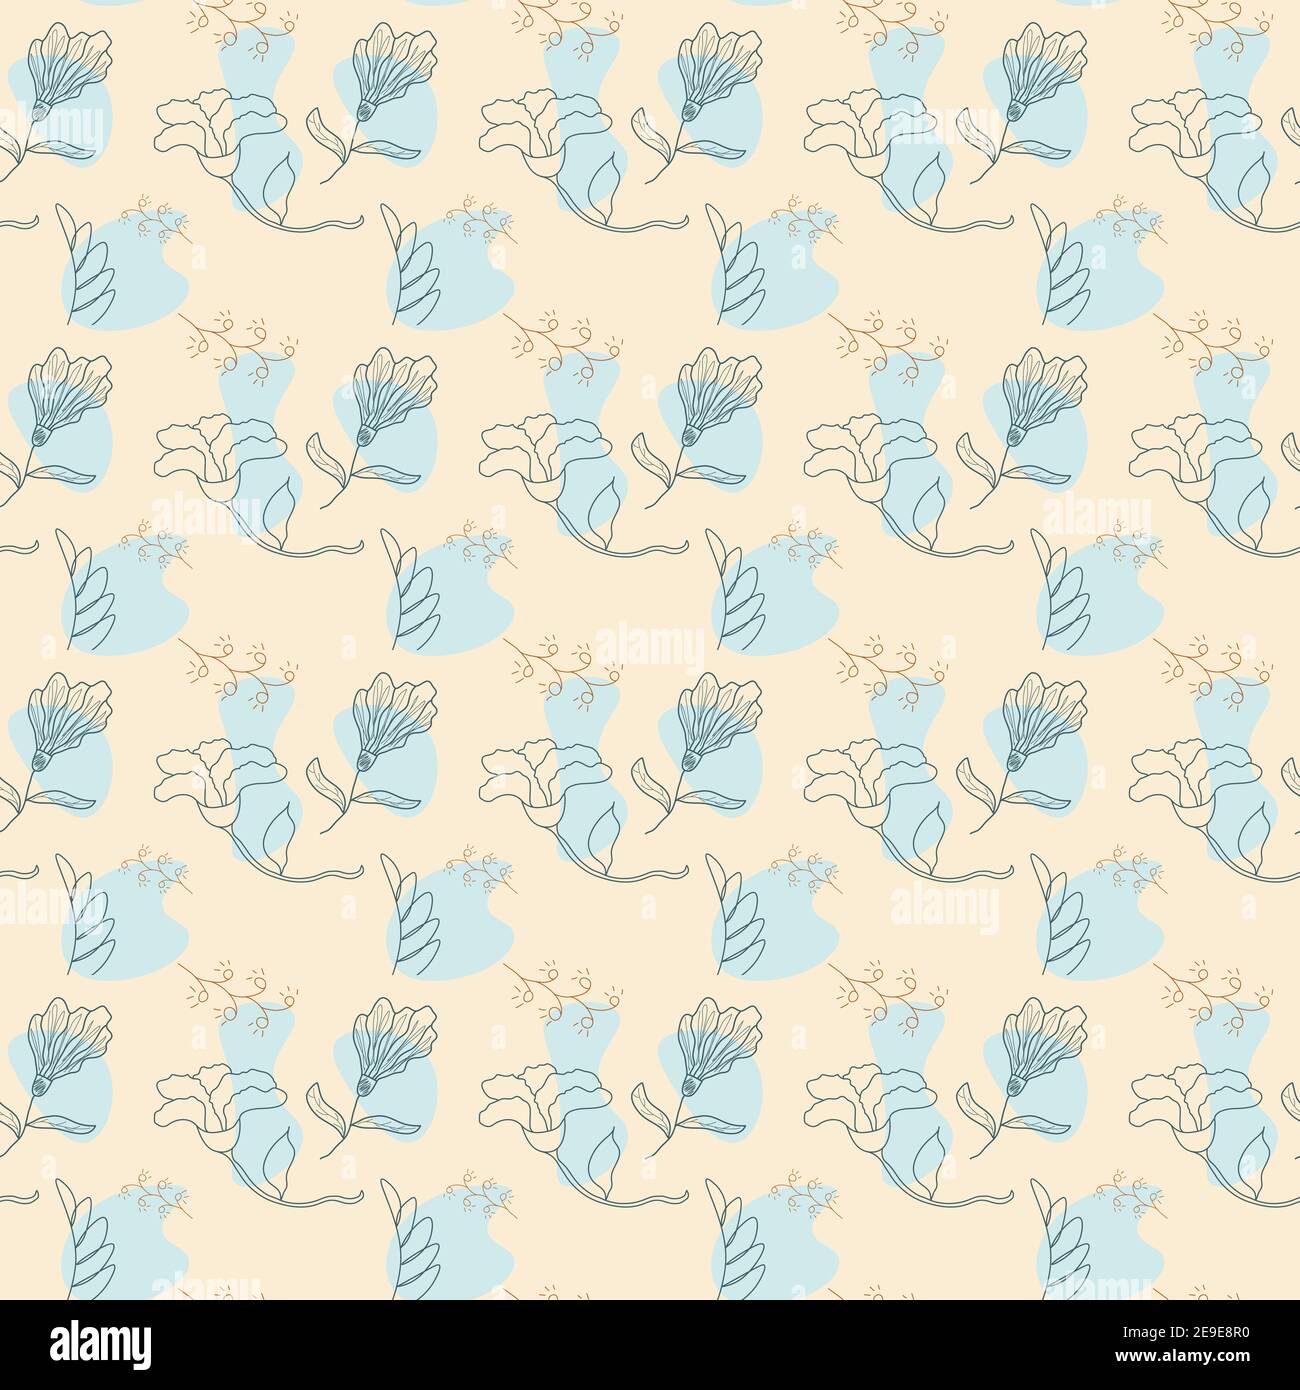 Seamless pattern with outline botanical doodles and light blue shapes on beige background Stock Vector